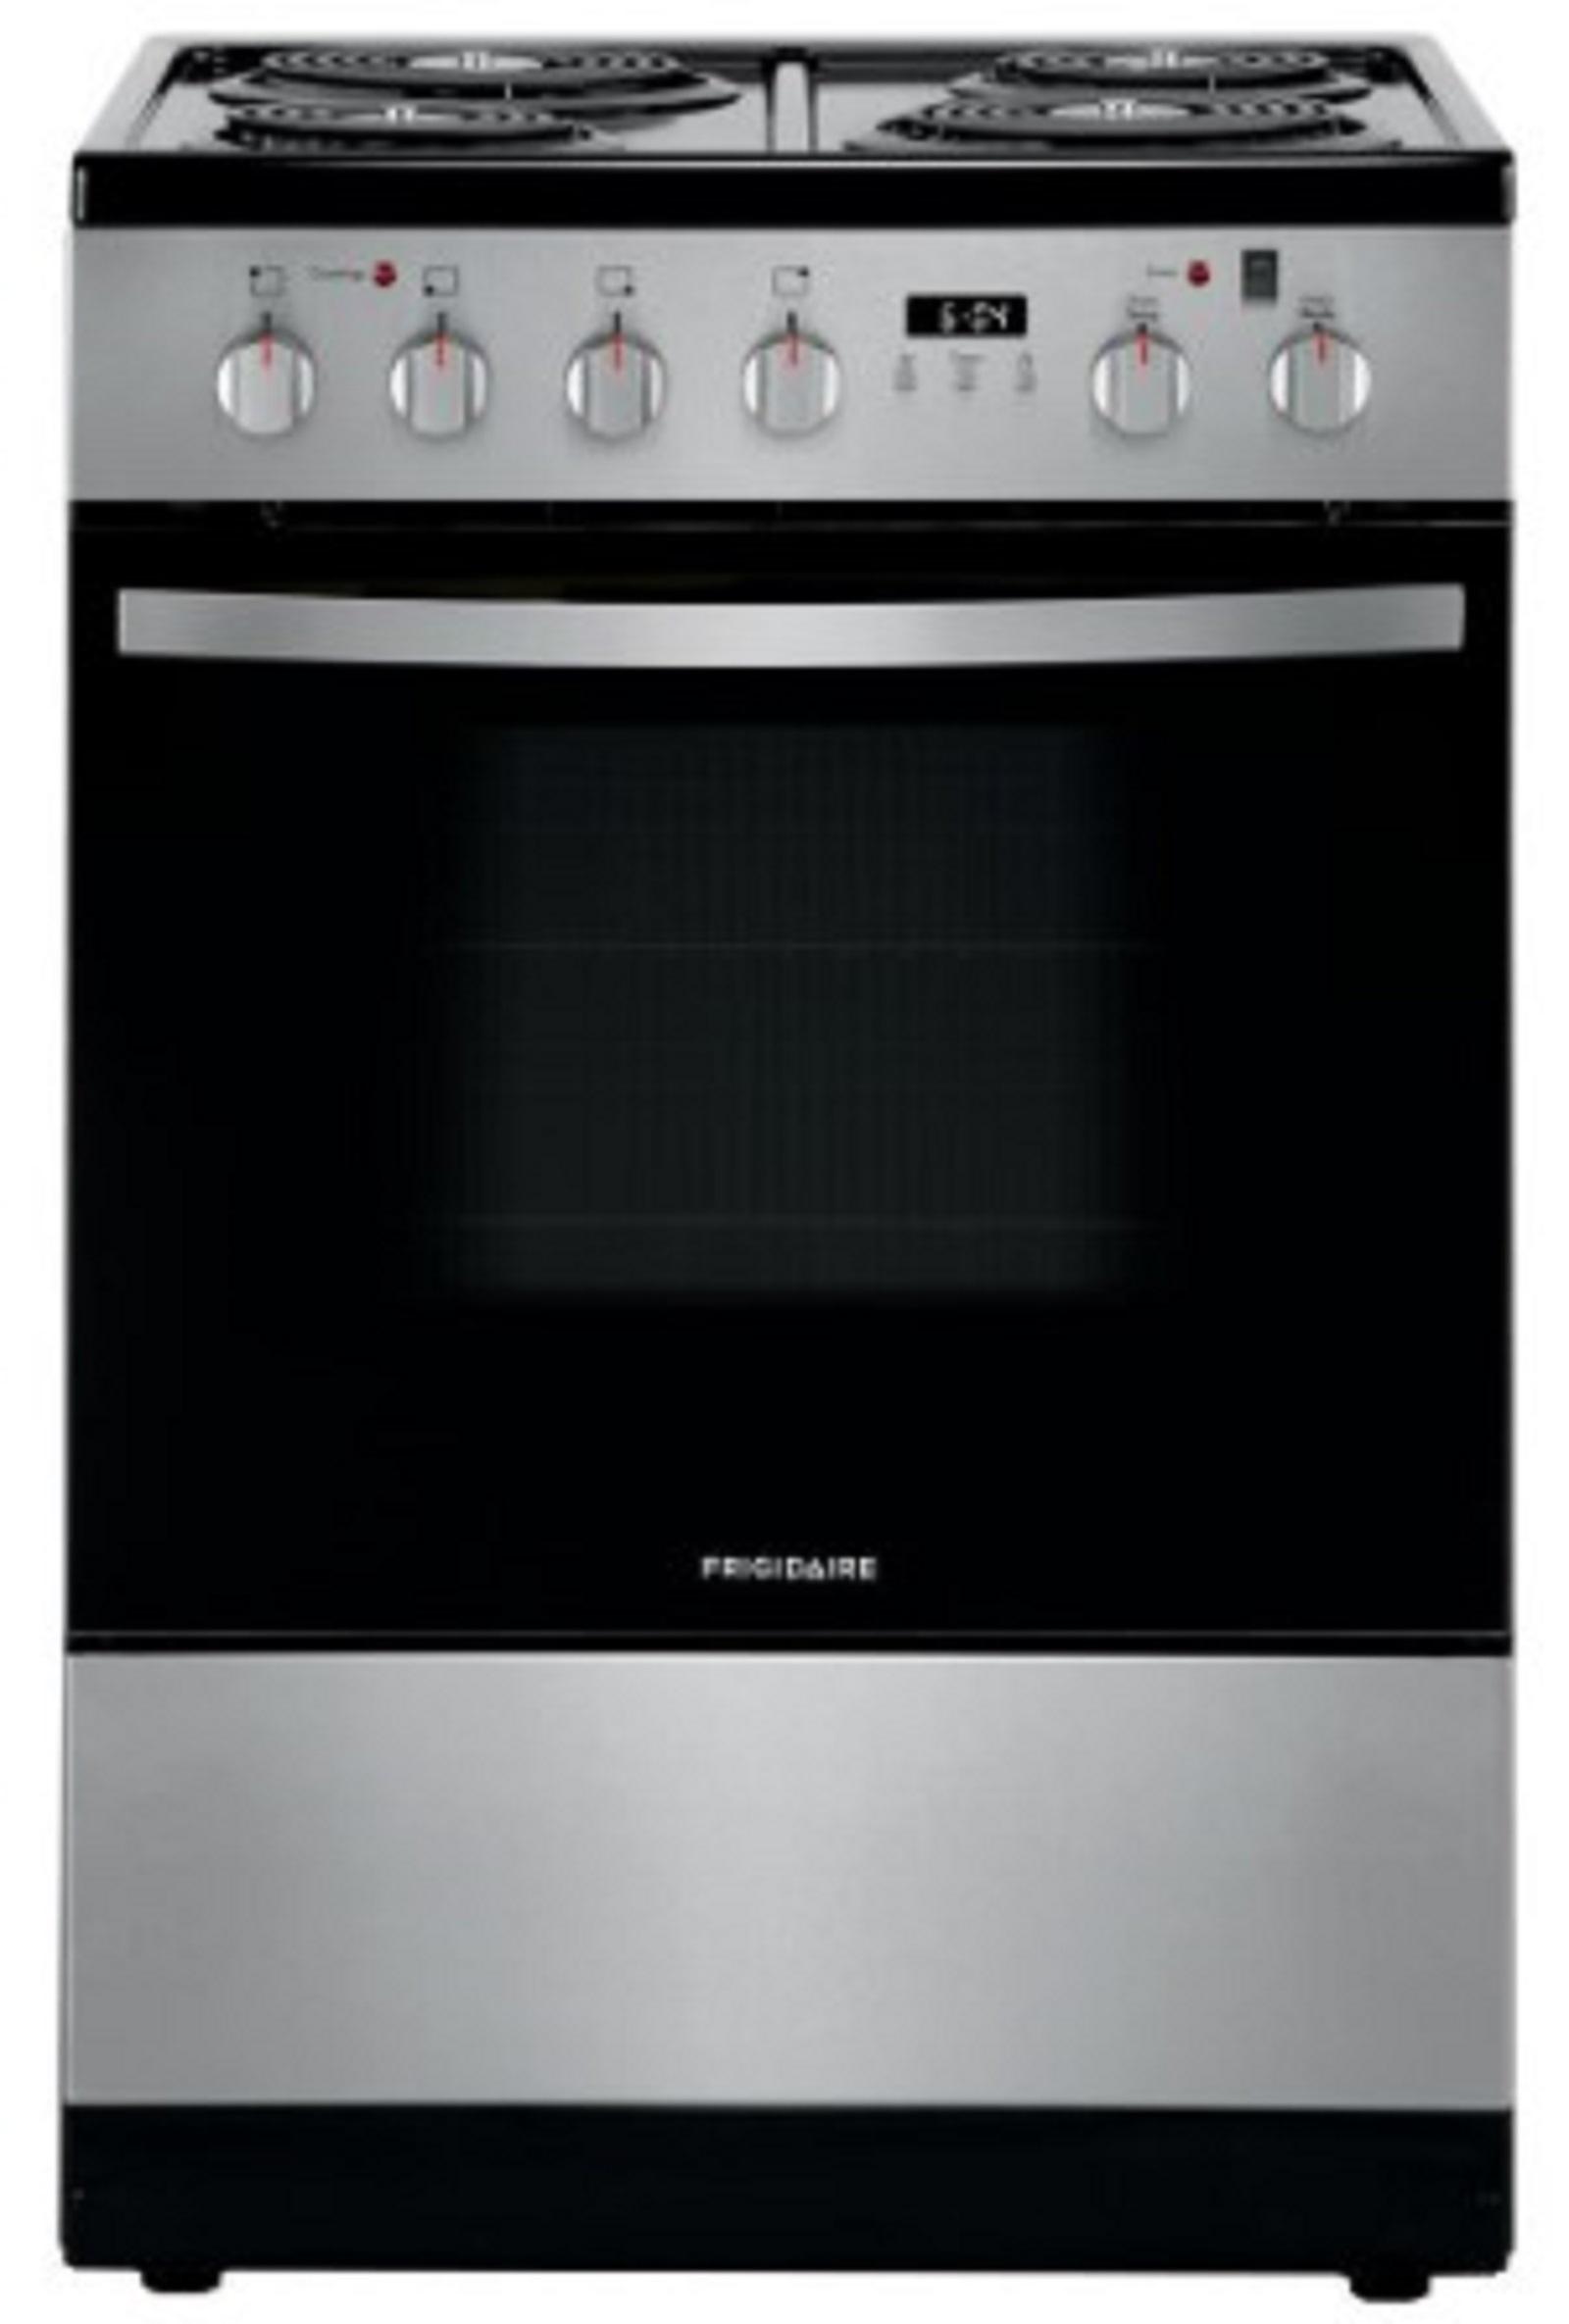 Frigidaire FFEH2422US 24 Freestanding Electric Coil Range ADA – Stainless Steel